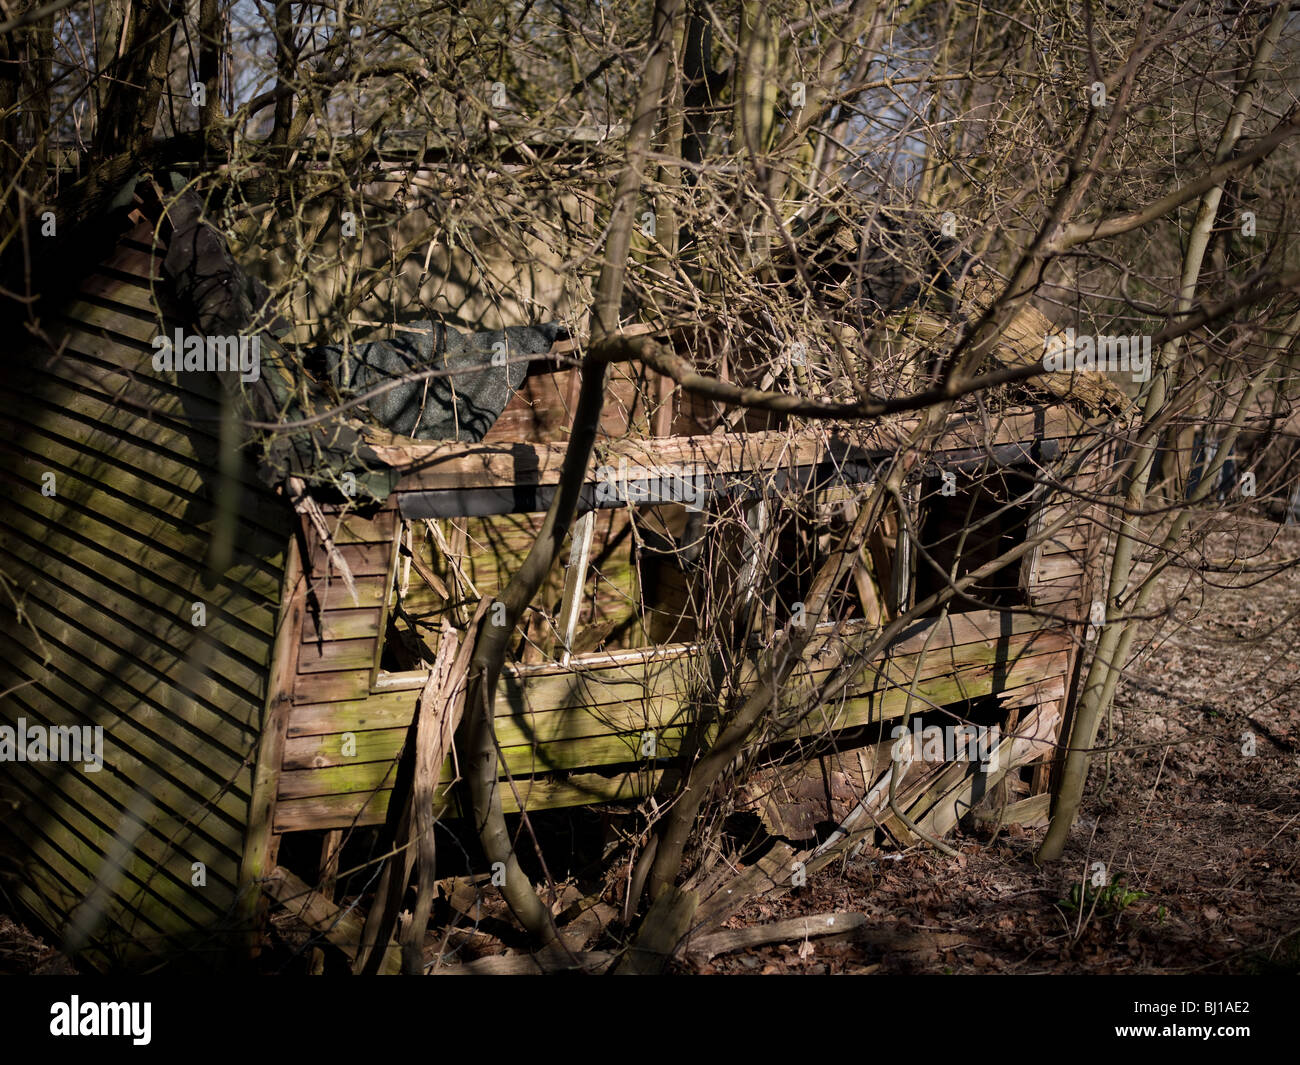 Broken Shed Stock Photos & Broken Shed Stock Images - Alamy